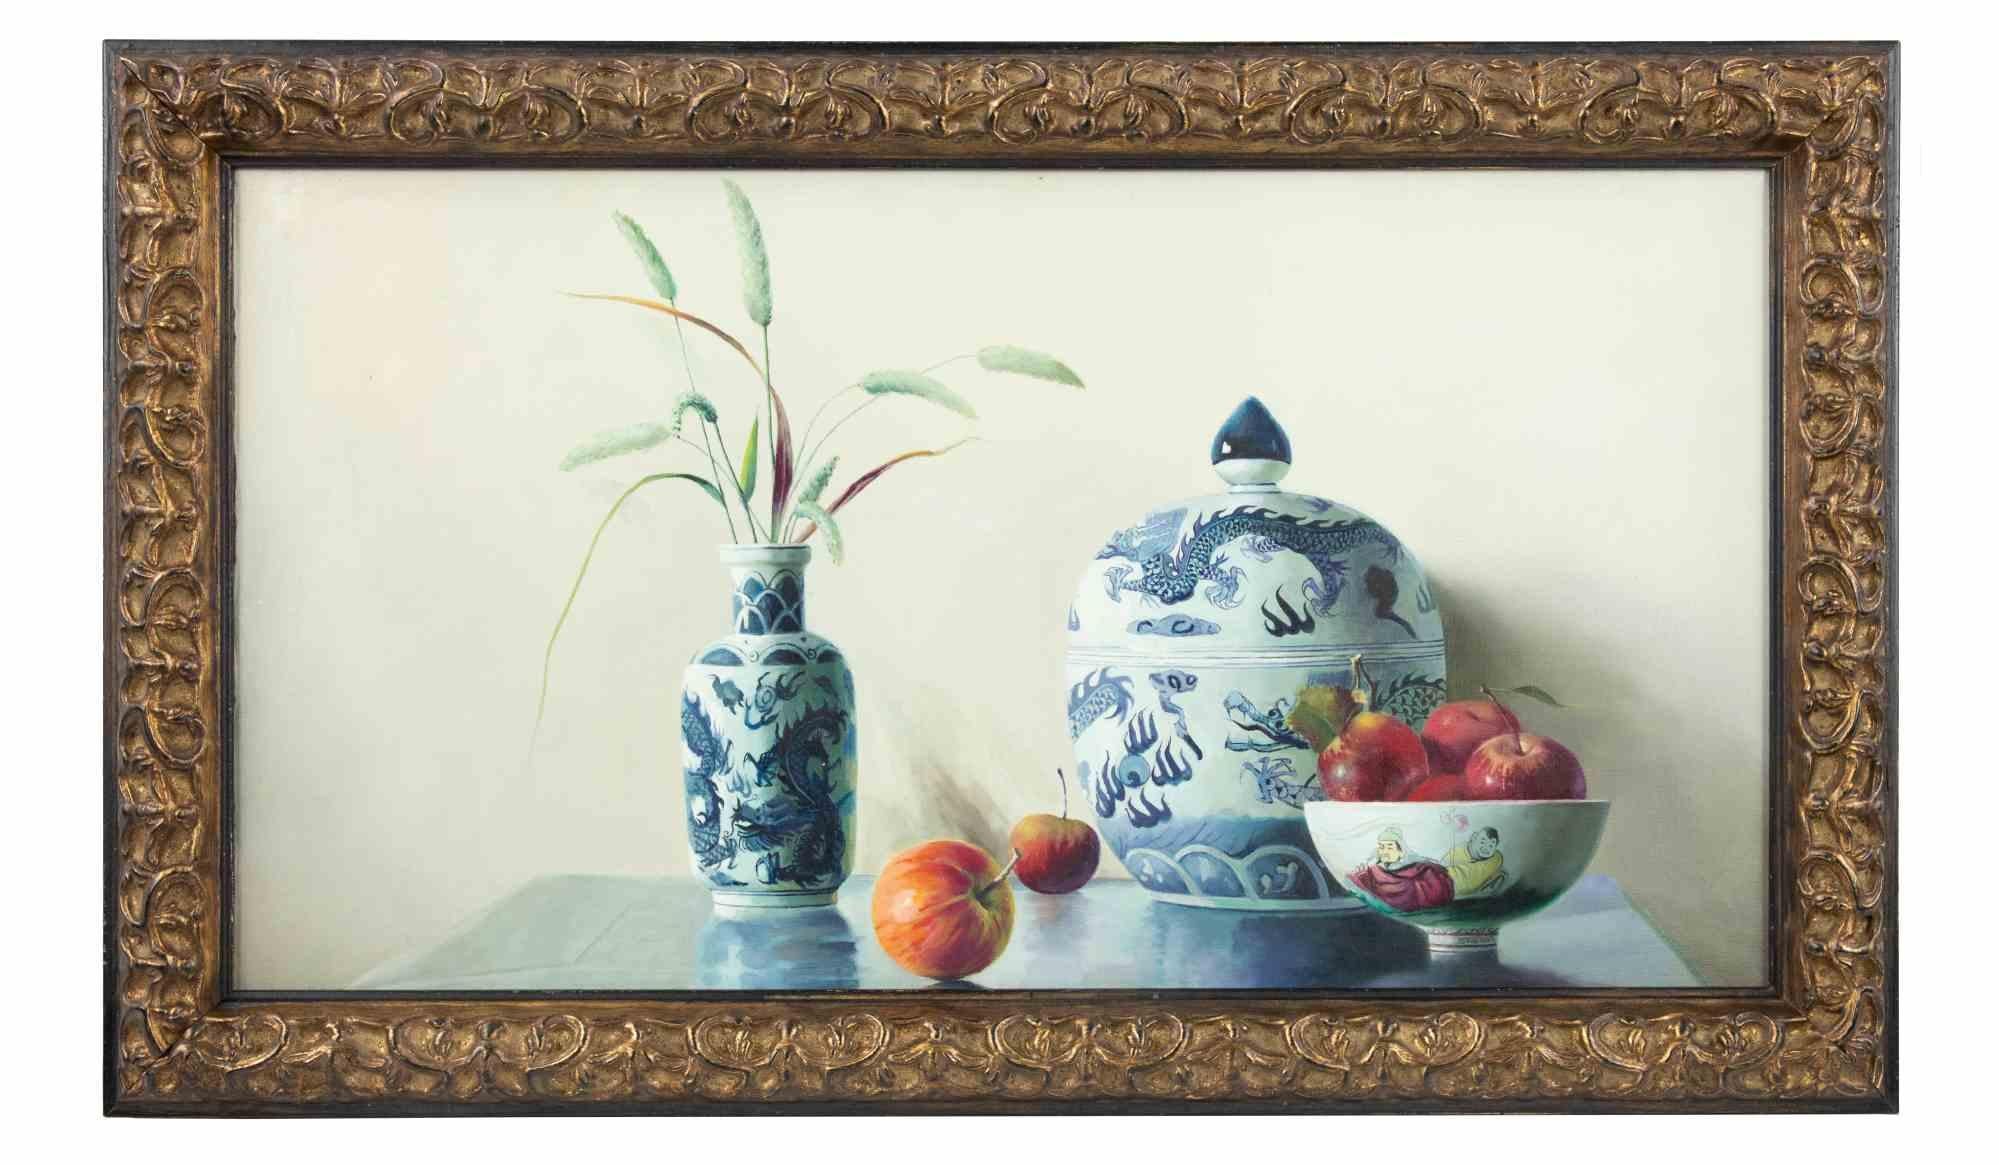 Vases and fruits is an original oil painting realized in 2006 by Zhang Wei Guang (Mirror).

Beautiful oil painting on canvas. 

Includes frame.

Hand-signed and dated on the back

Zhang Wei Guang , also called ‘mirror' was born in Helong Jang, China